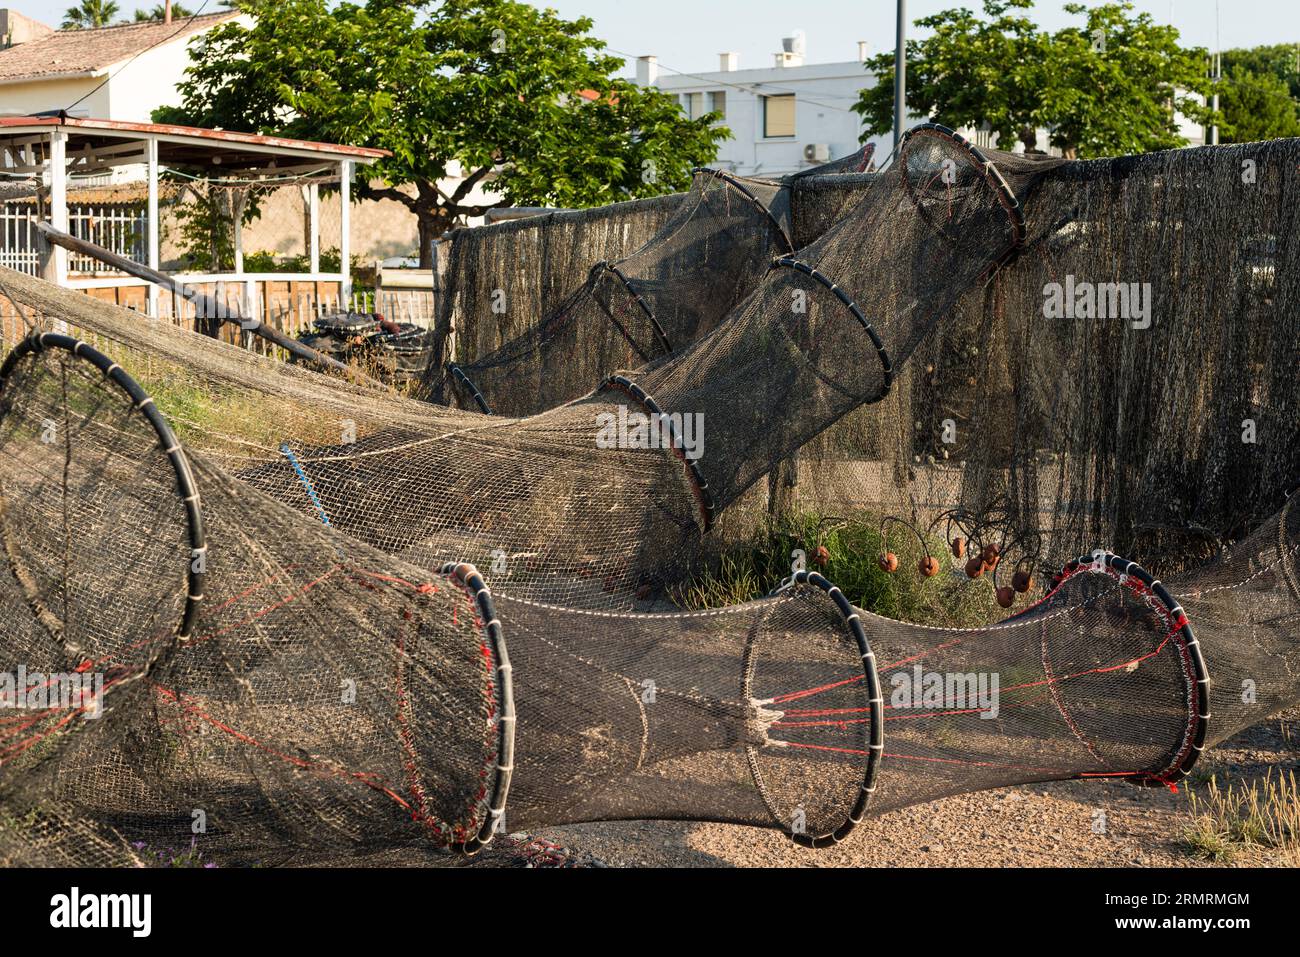 Fishing nets stored for use, Meze, Herault, Occitanie, France Stock Photo